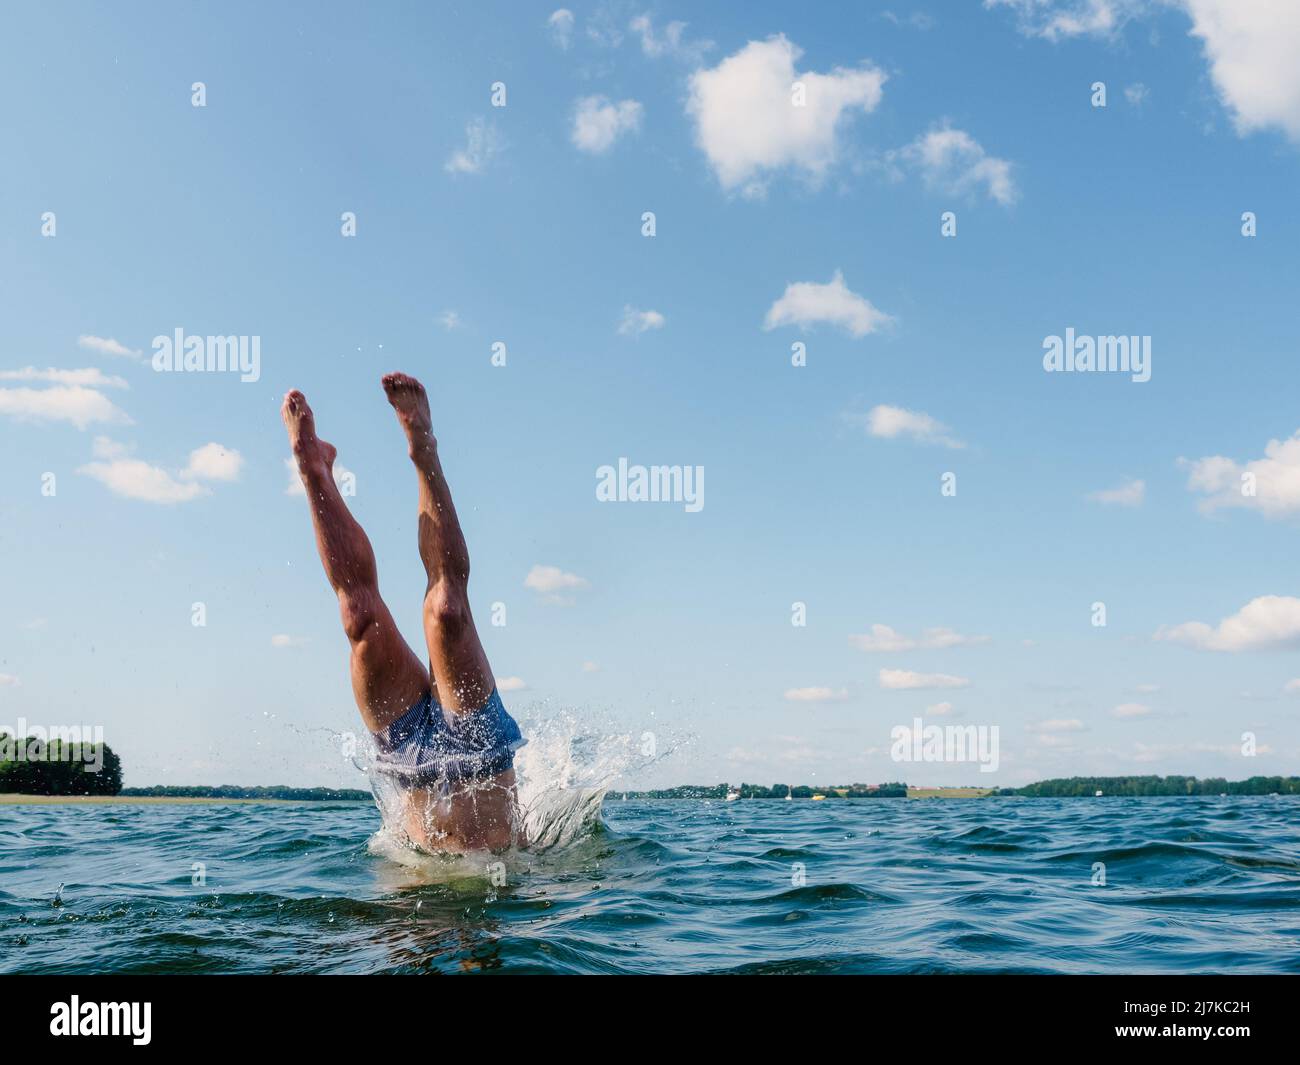 person diving into the water, view on human legs Stock Photo